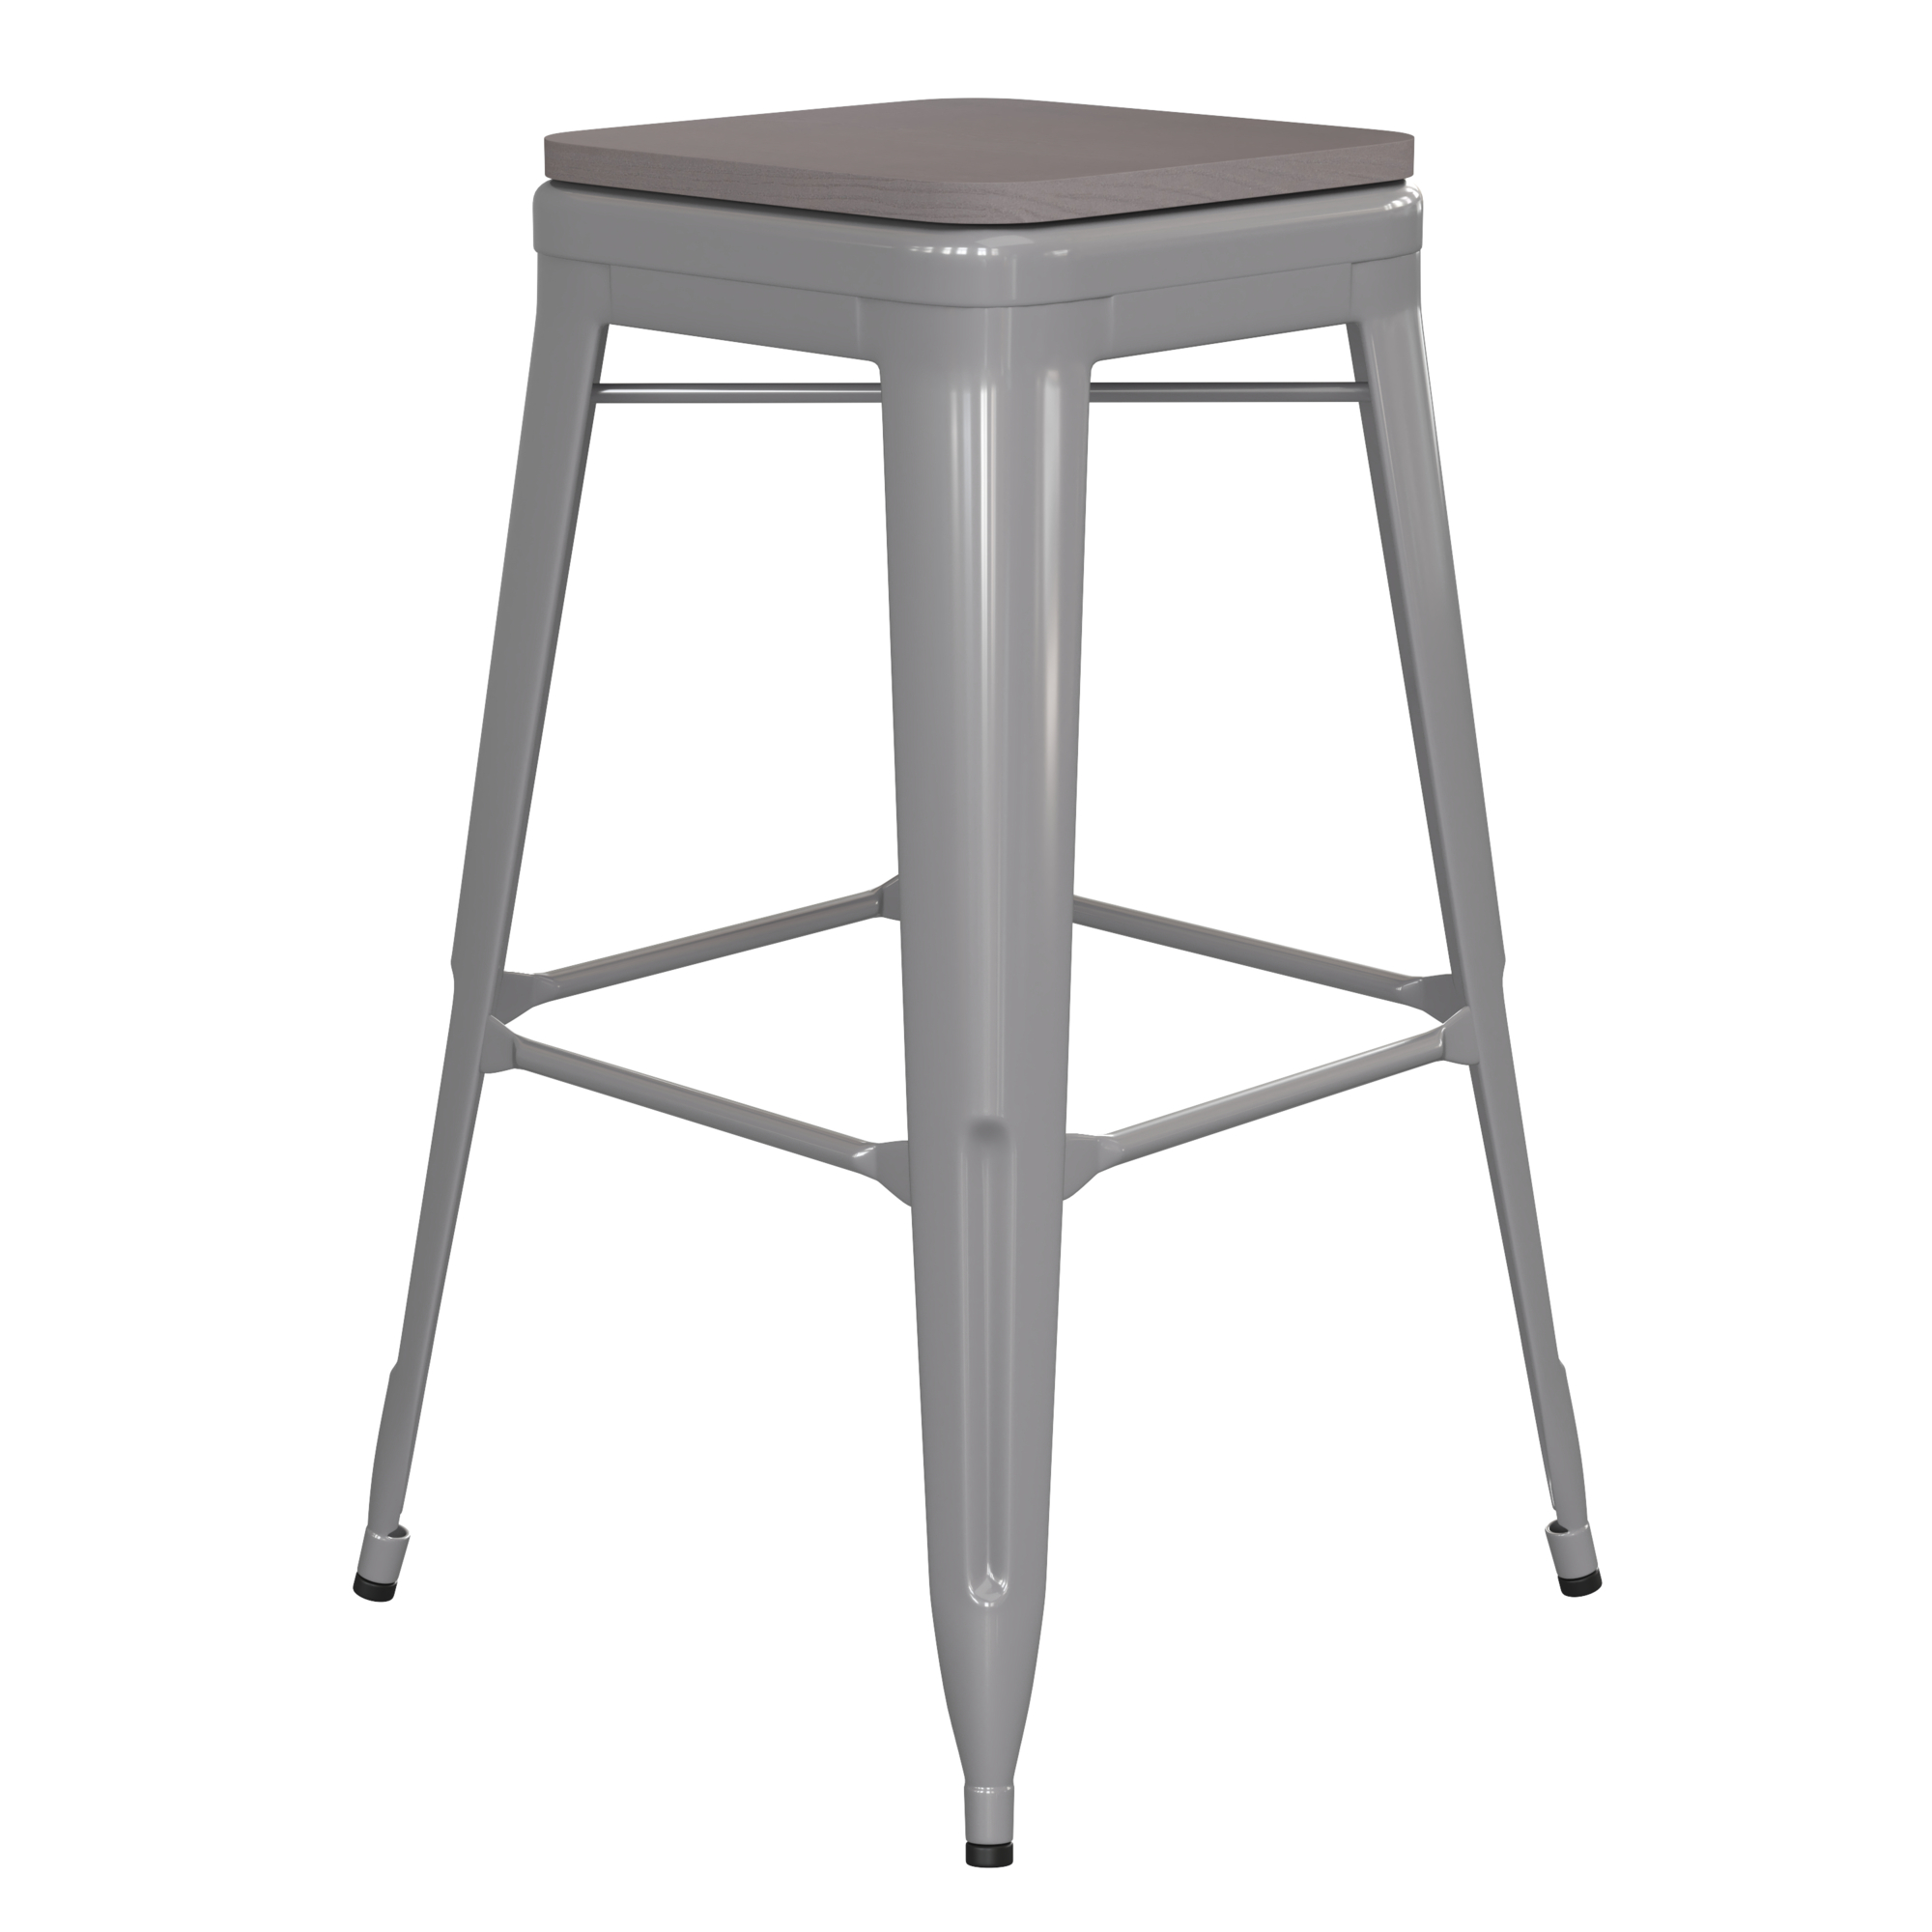 Flash Furniture, 30Inch Silver Metal Stool-Gray Poly Seat, Primary Color Gray, Included (qty.) 1, Model CH3132030SILP2G